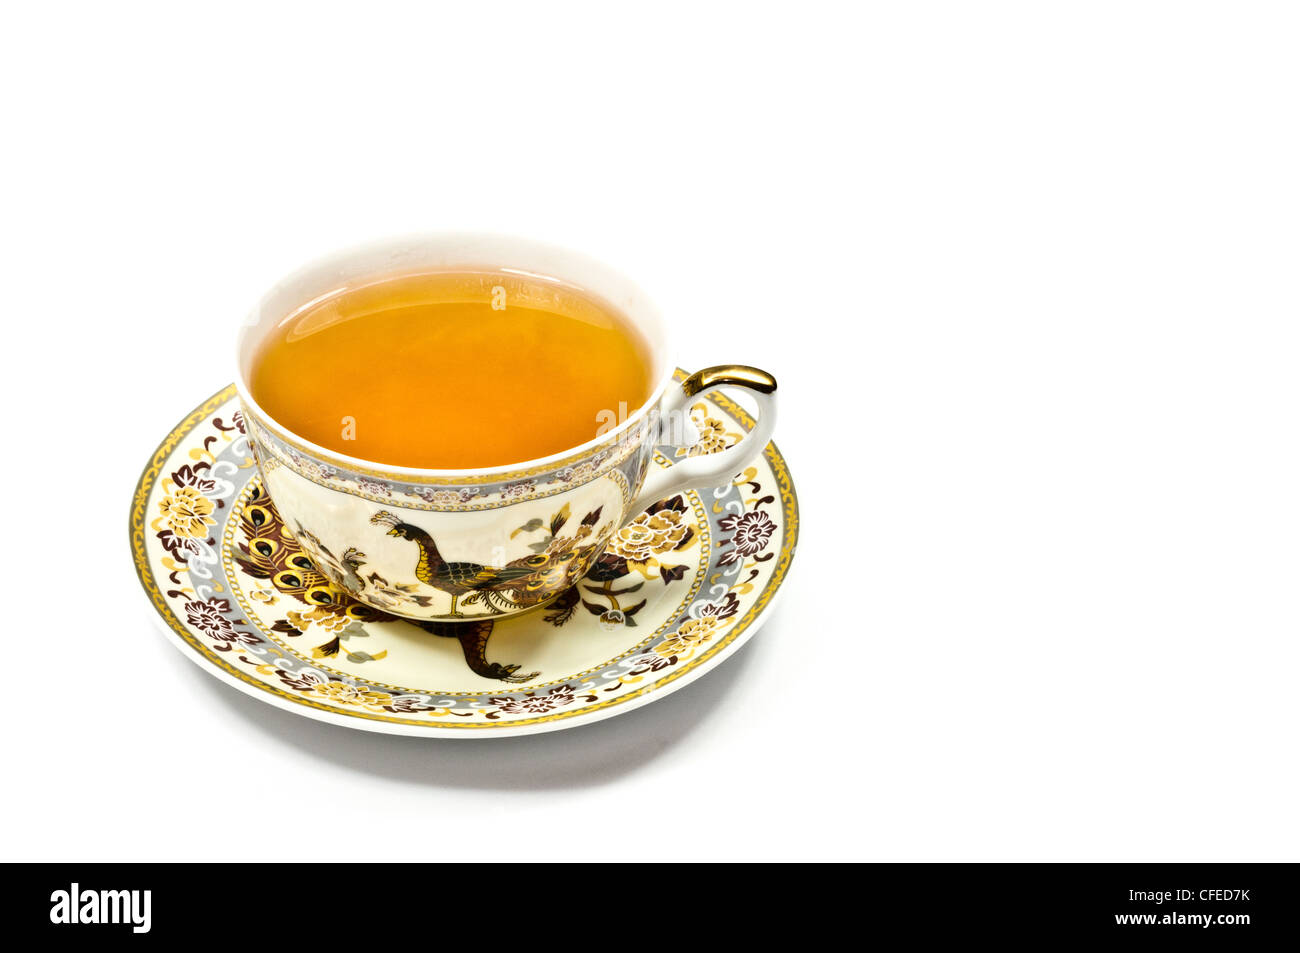 A classic gold-rimmed china teacup and saucer. Isolated on white. Stock Photo